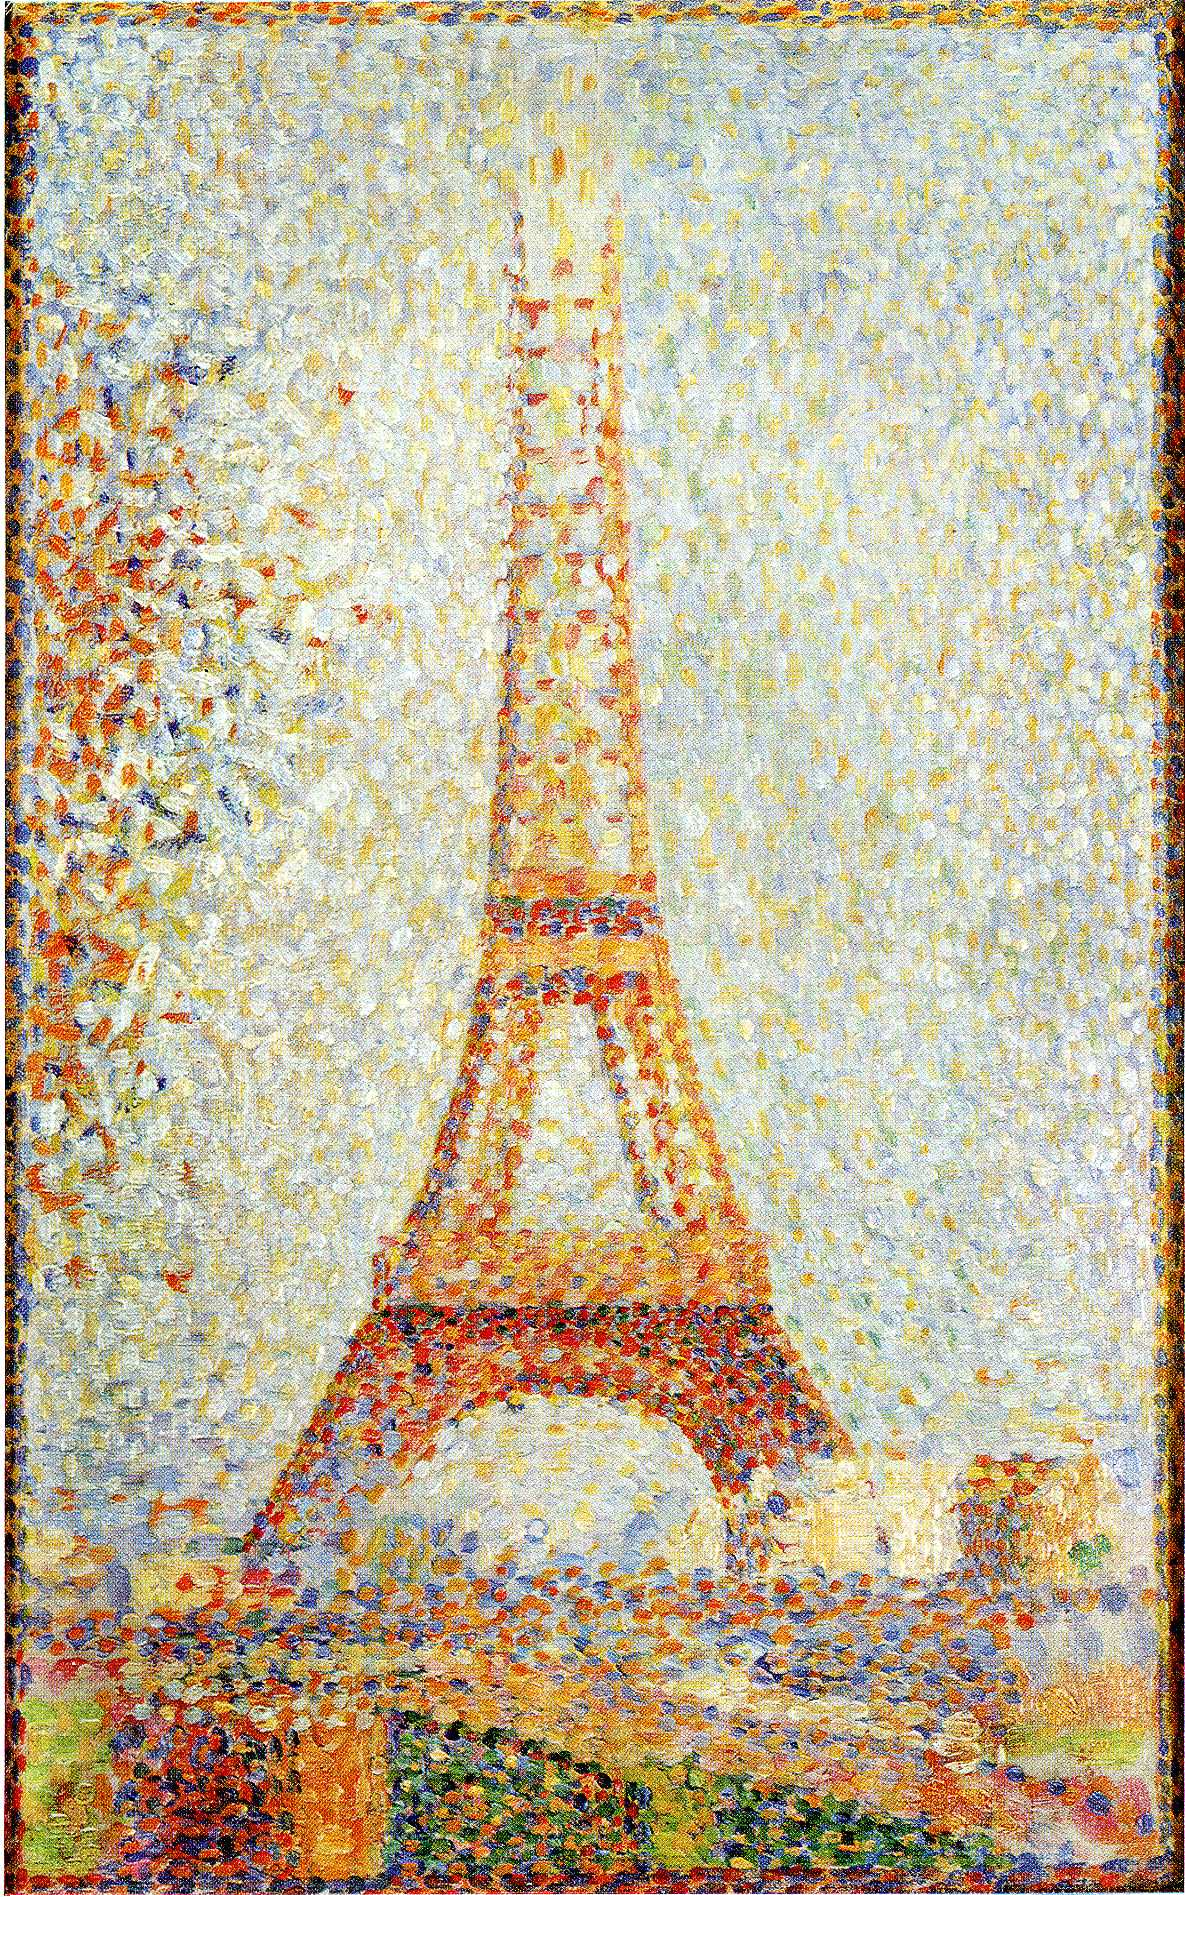 A Torre Eiffel by Georges Seurat - 1889 